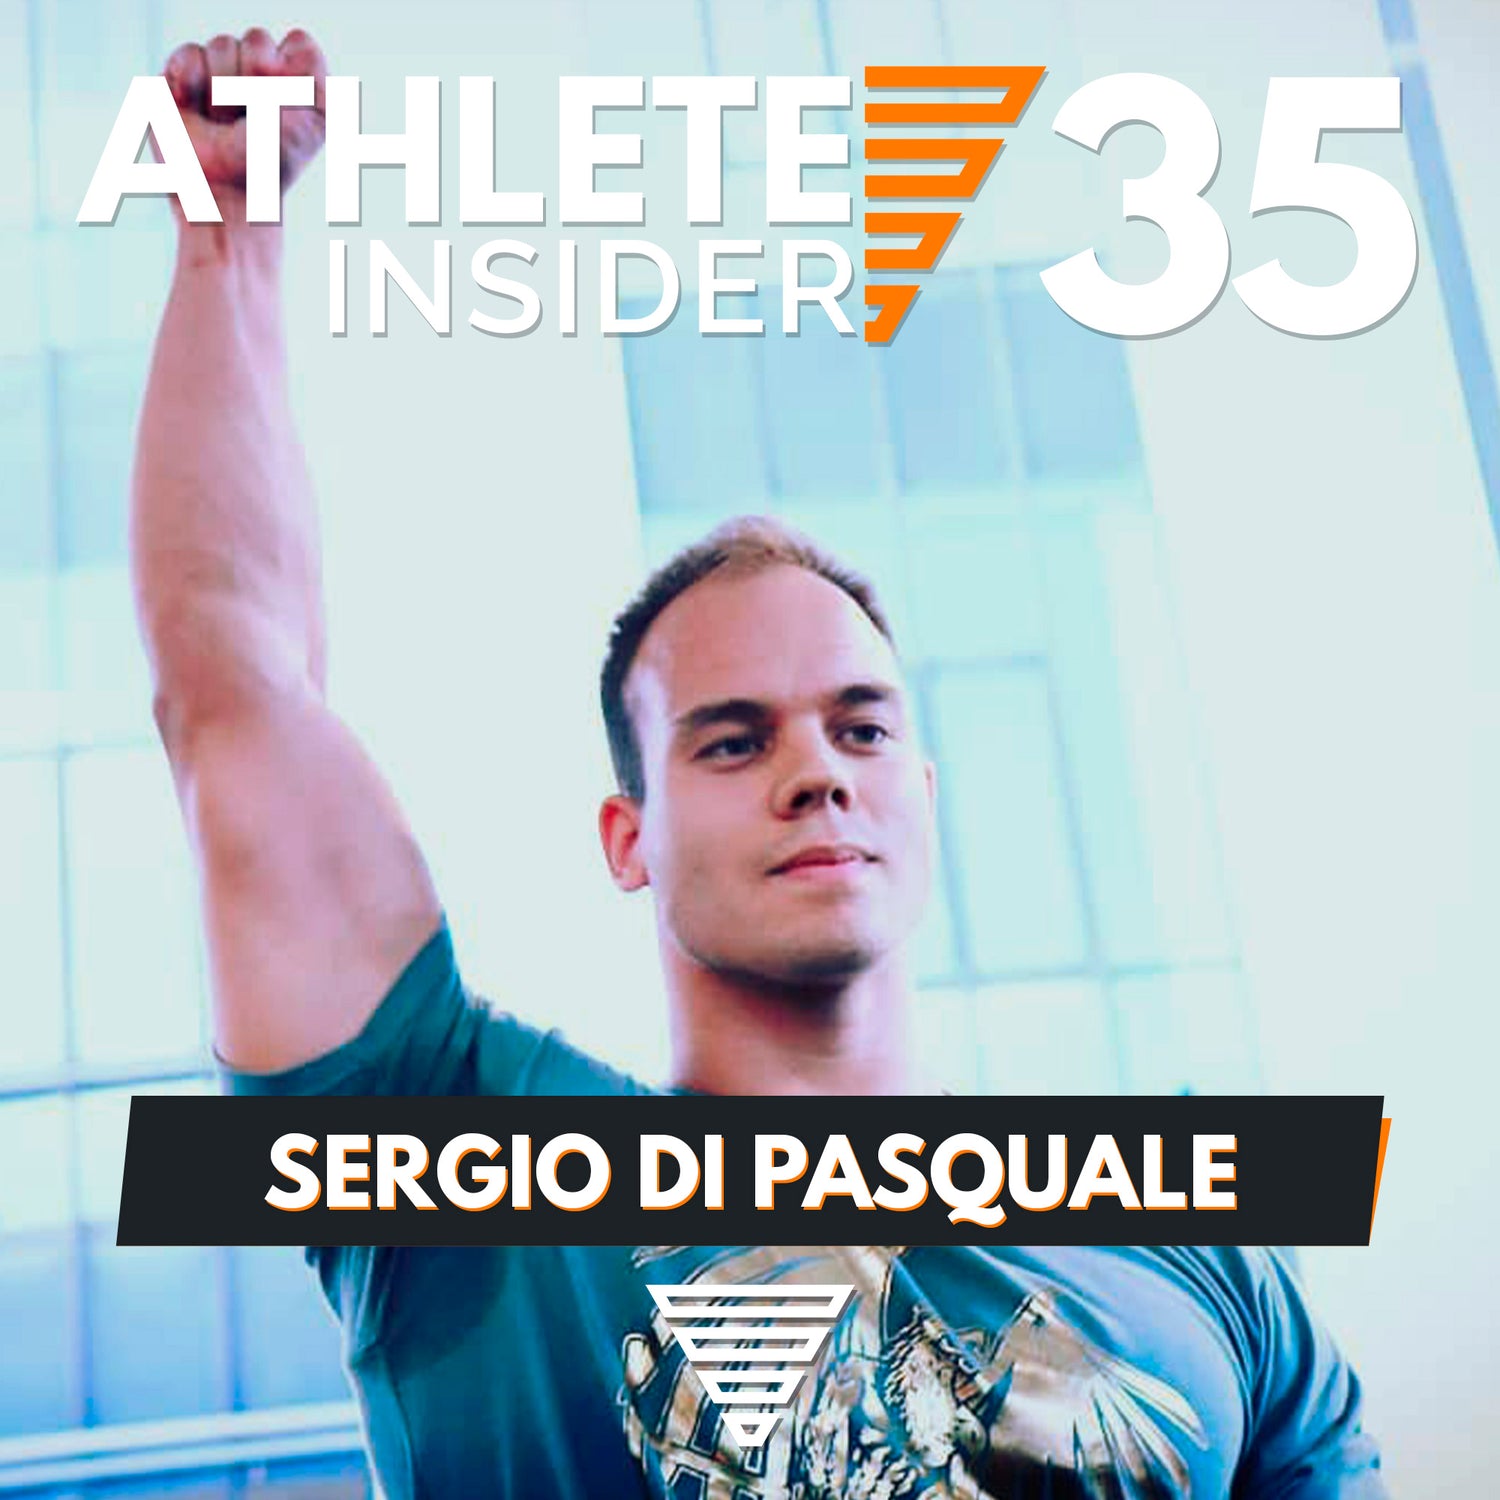 SERGIO DI PASQUALE | Get to know the Endurance Beast  | Interview | The Athlete Insider Podcast #35